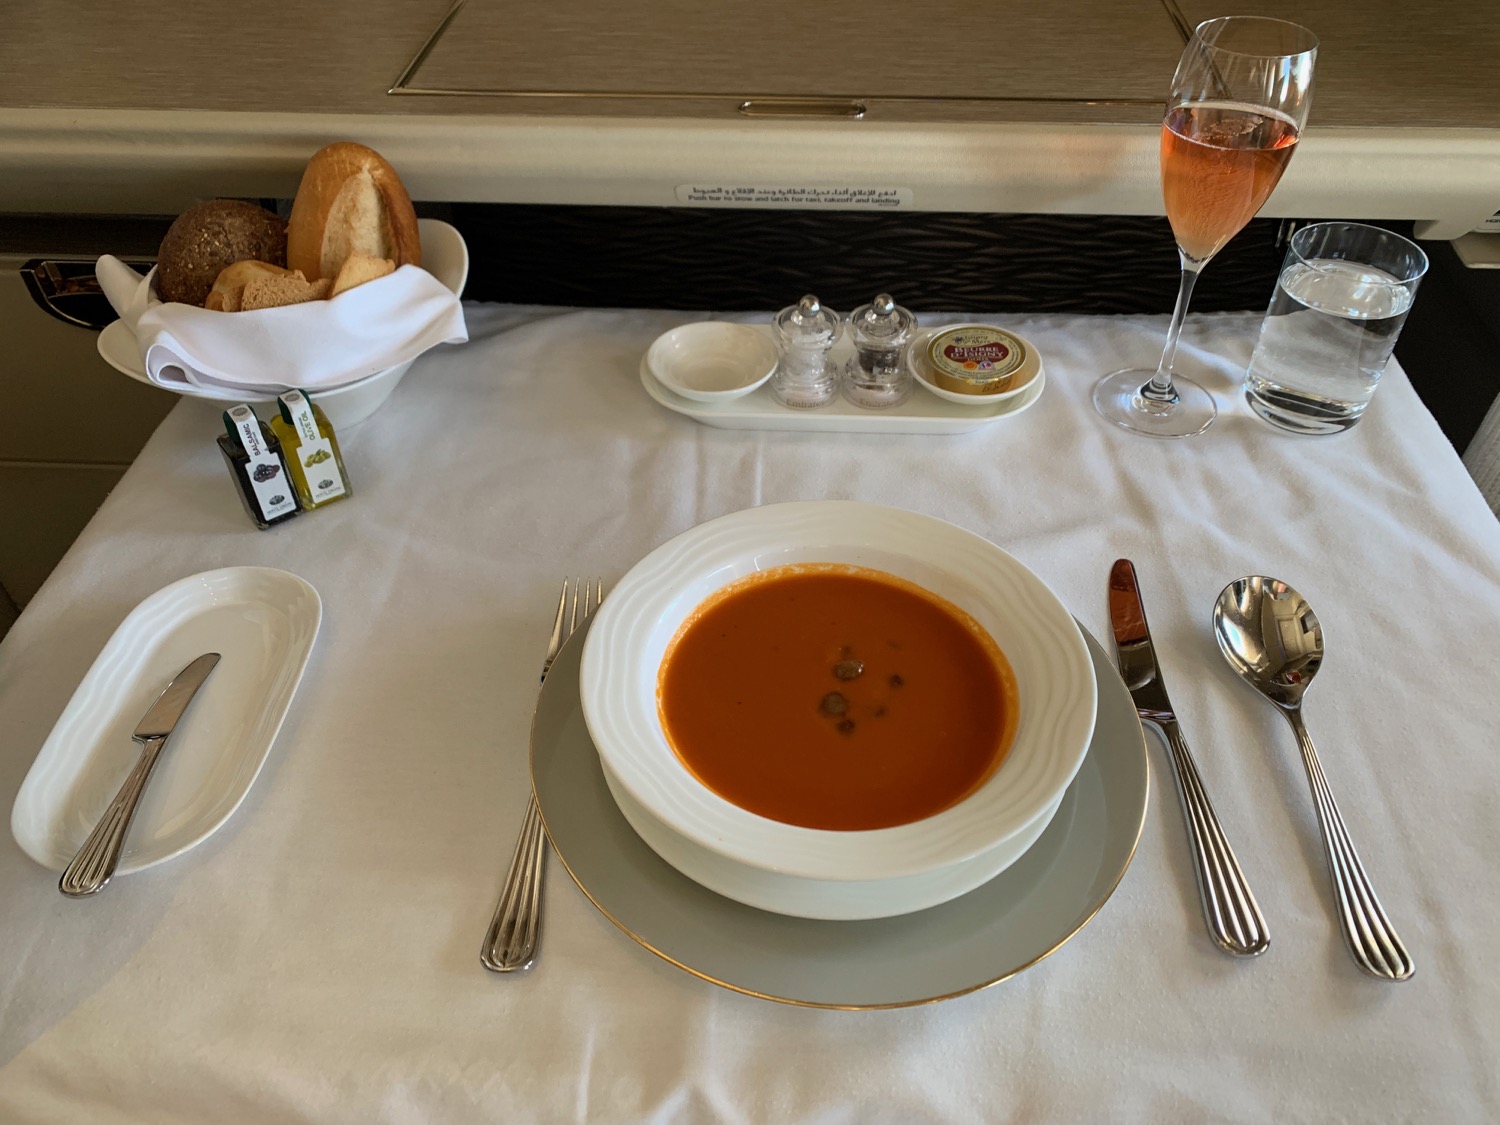 a plate of soup and silverware on a table